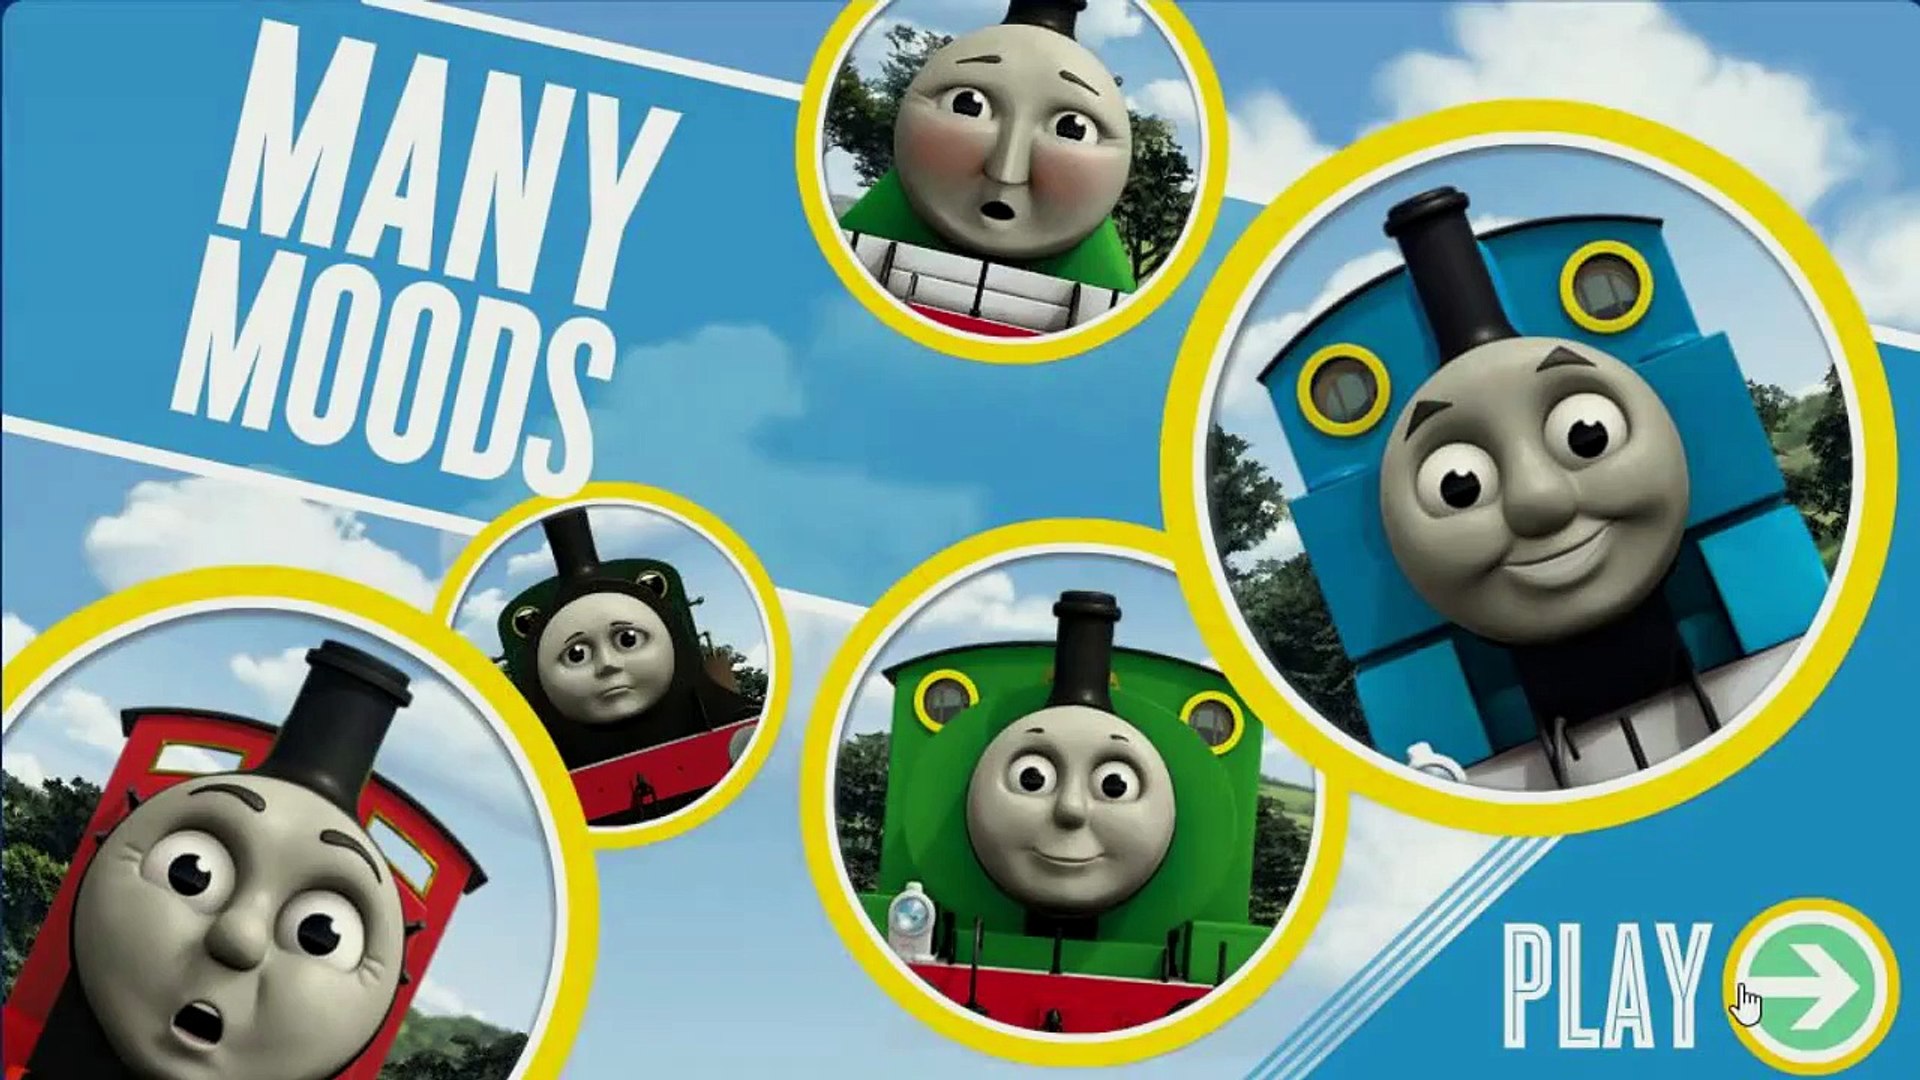 Thomas and friends games. Thomas and friends many moods game.